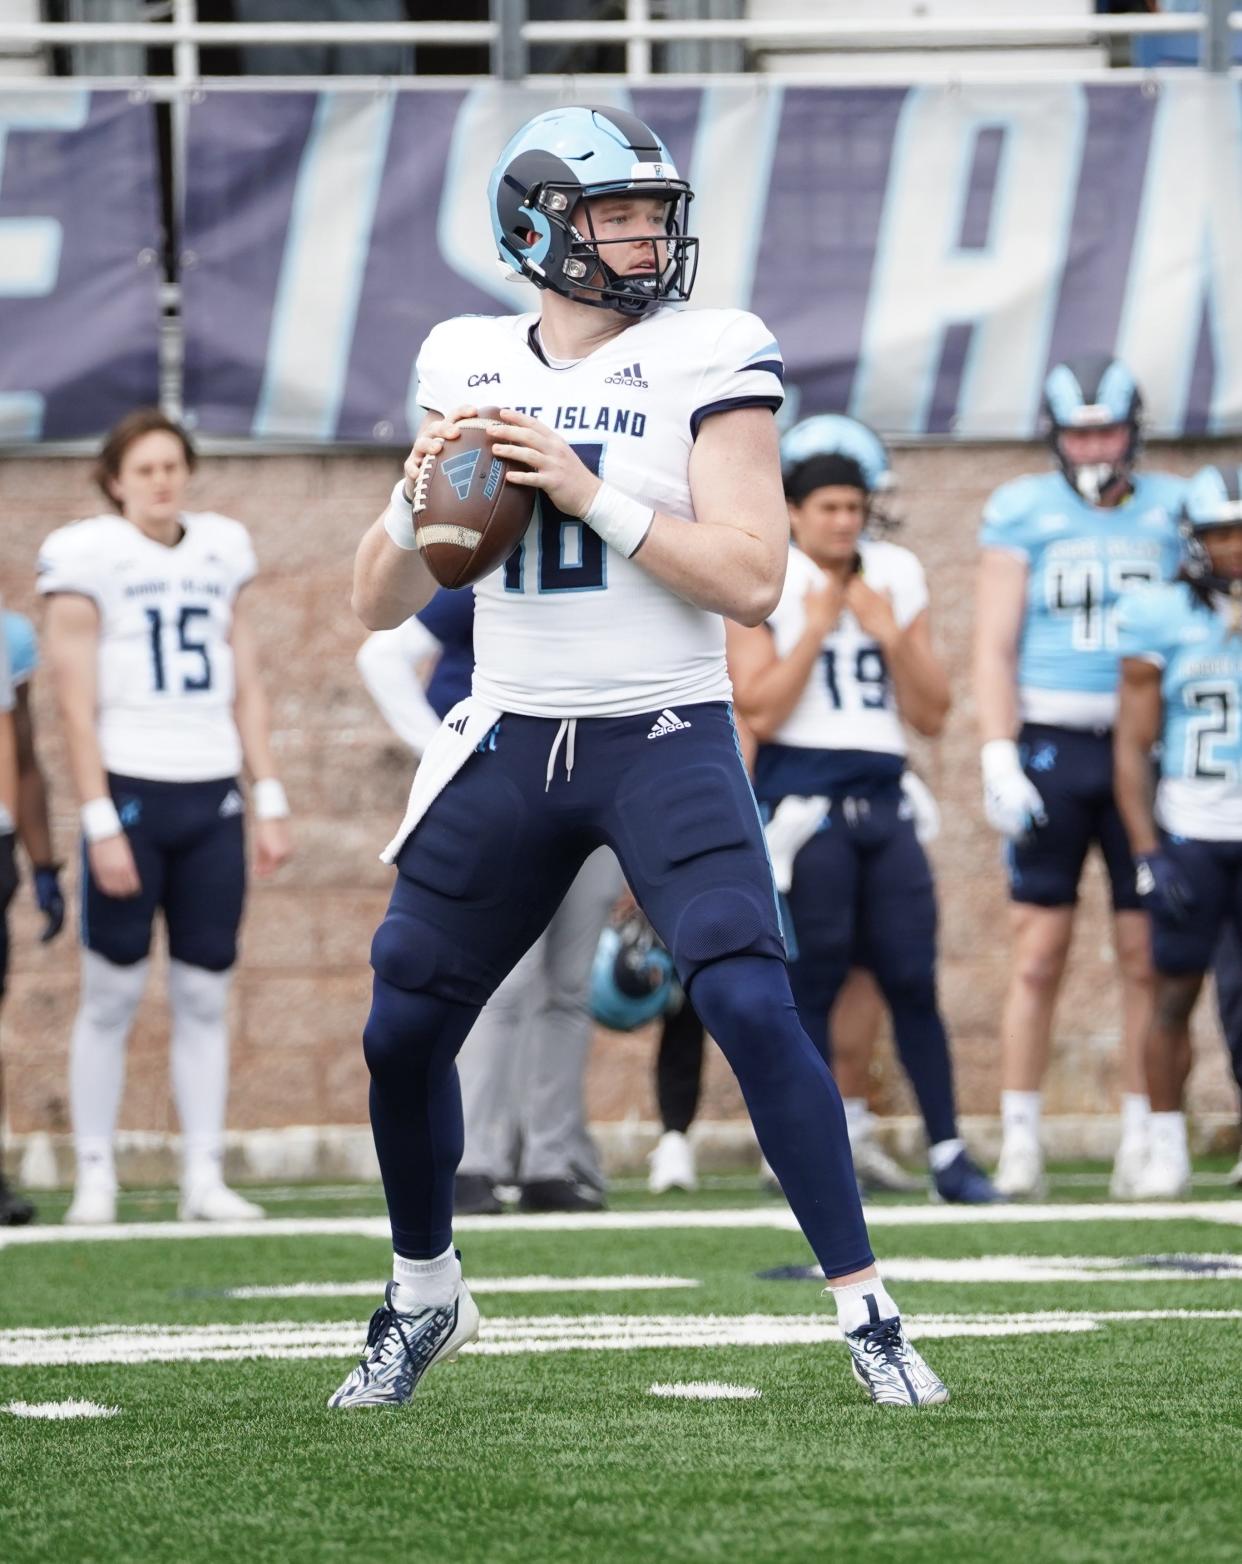 Hunter Helms looks to pass in Rhode Island's spring football game on Saturday.